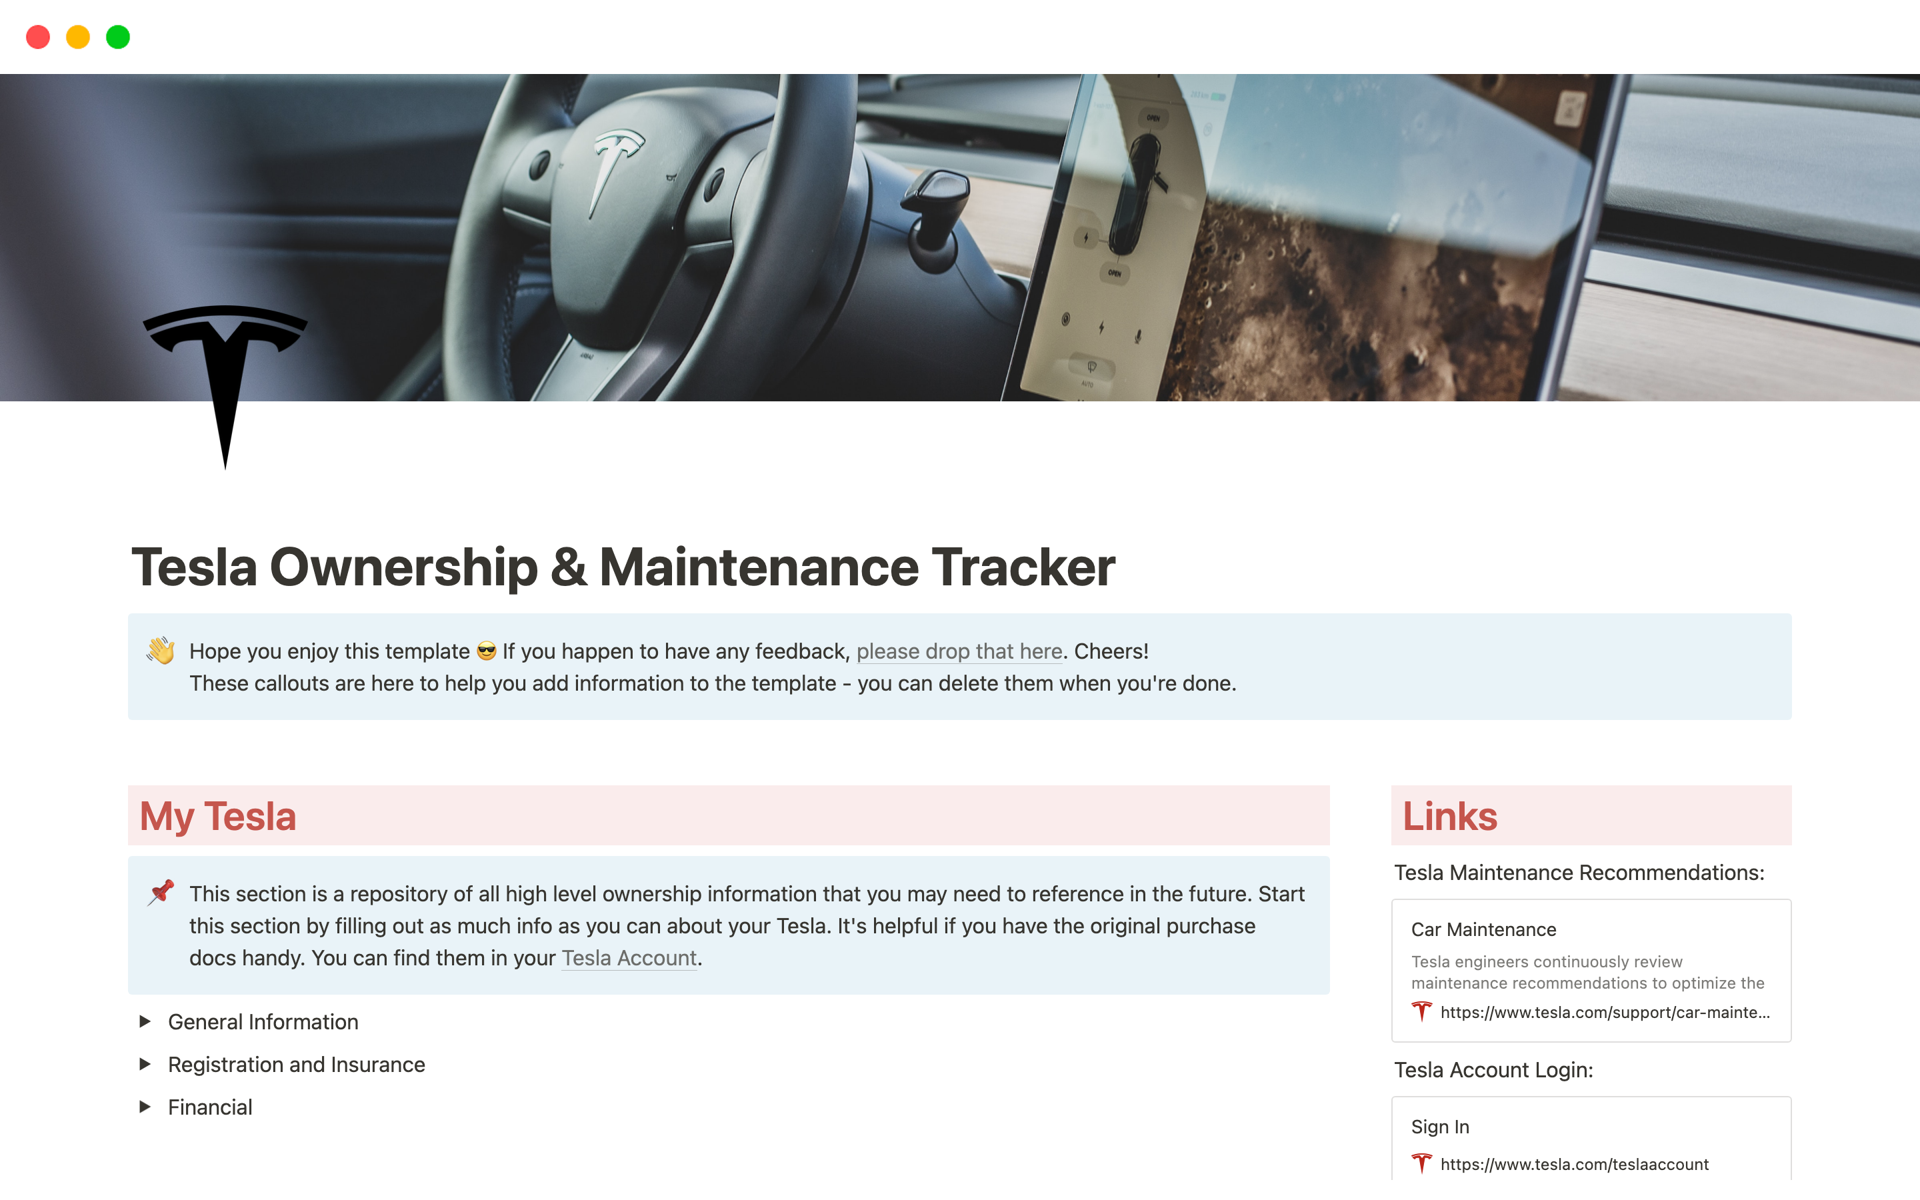 A centralized place to organize all  information related to your Tesla purchase and maintenance.